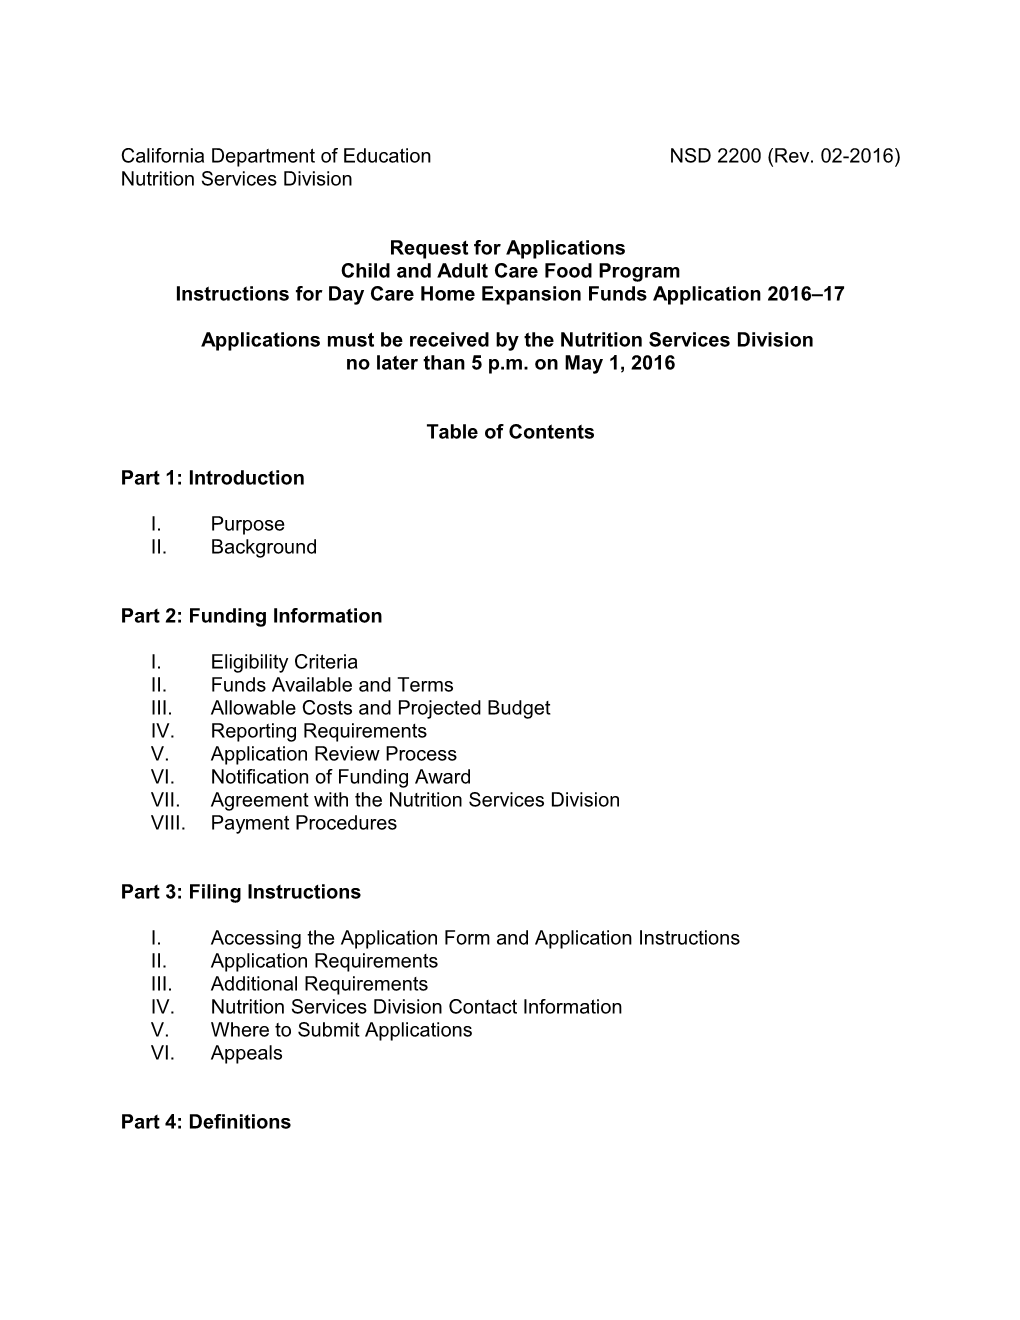 RFA-16: DCH Expansion Funds Instructions (CA Dept of Education)